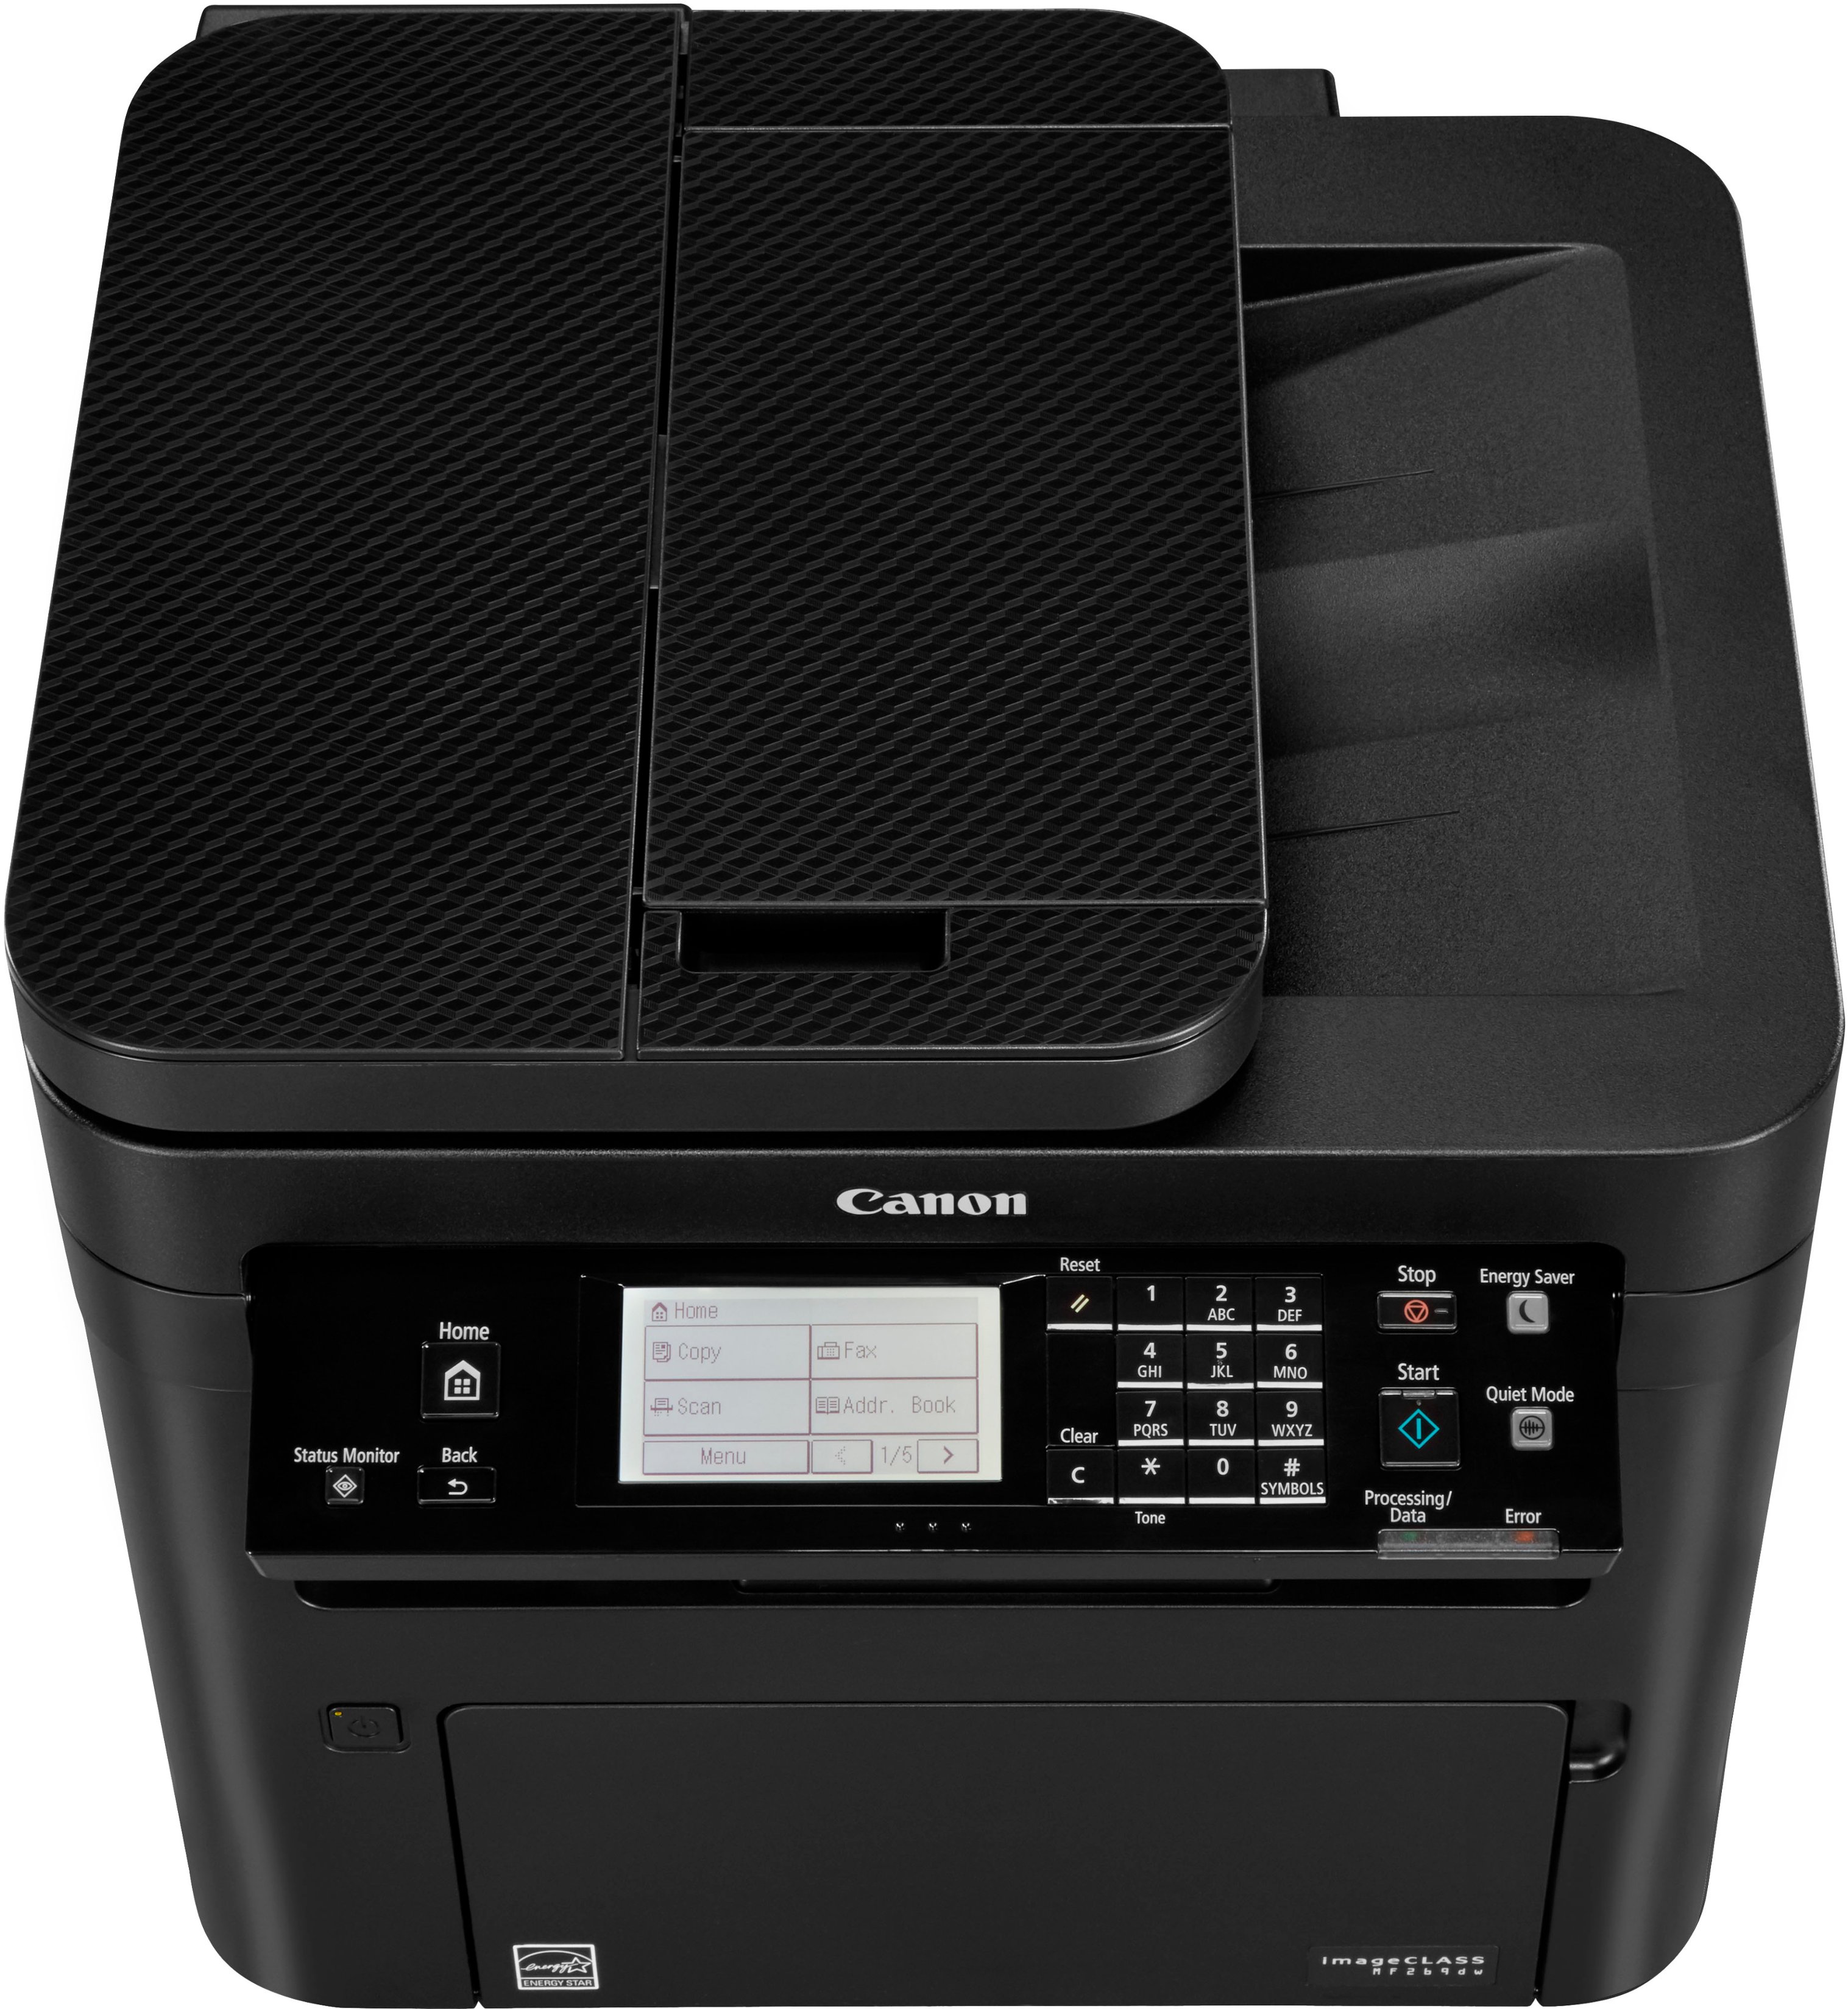 Angle View: Canon - imageCLASS MF269dw Wireless Black-and-White All-In-One Laser Printer - Black